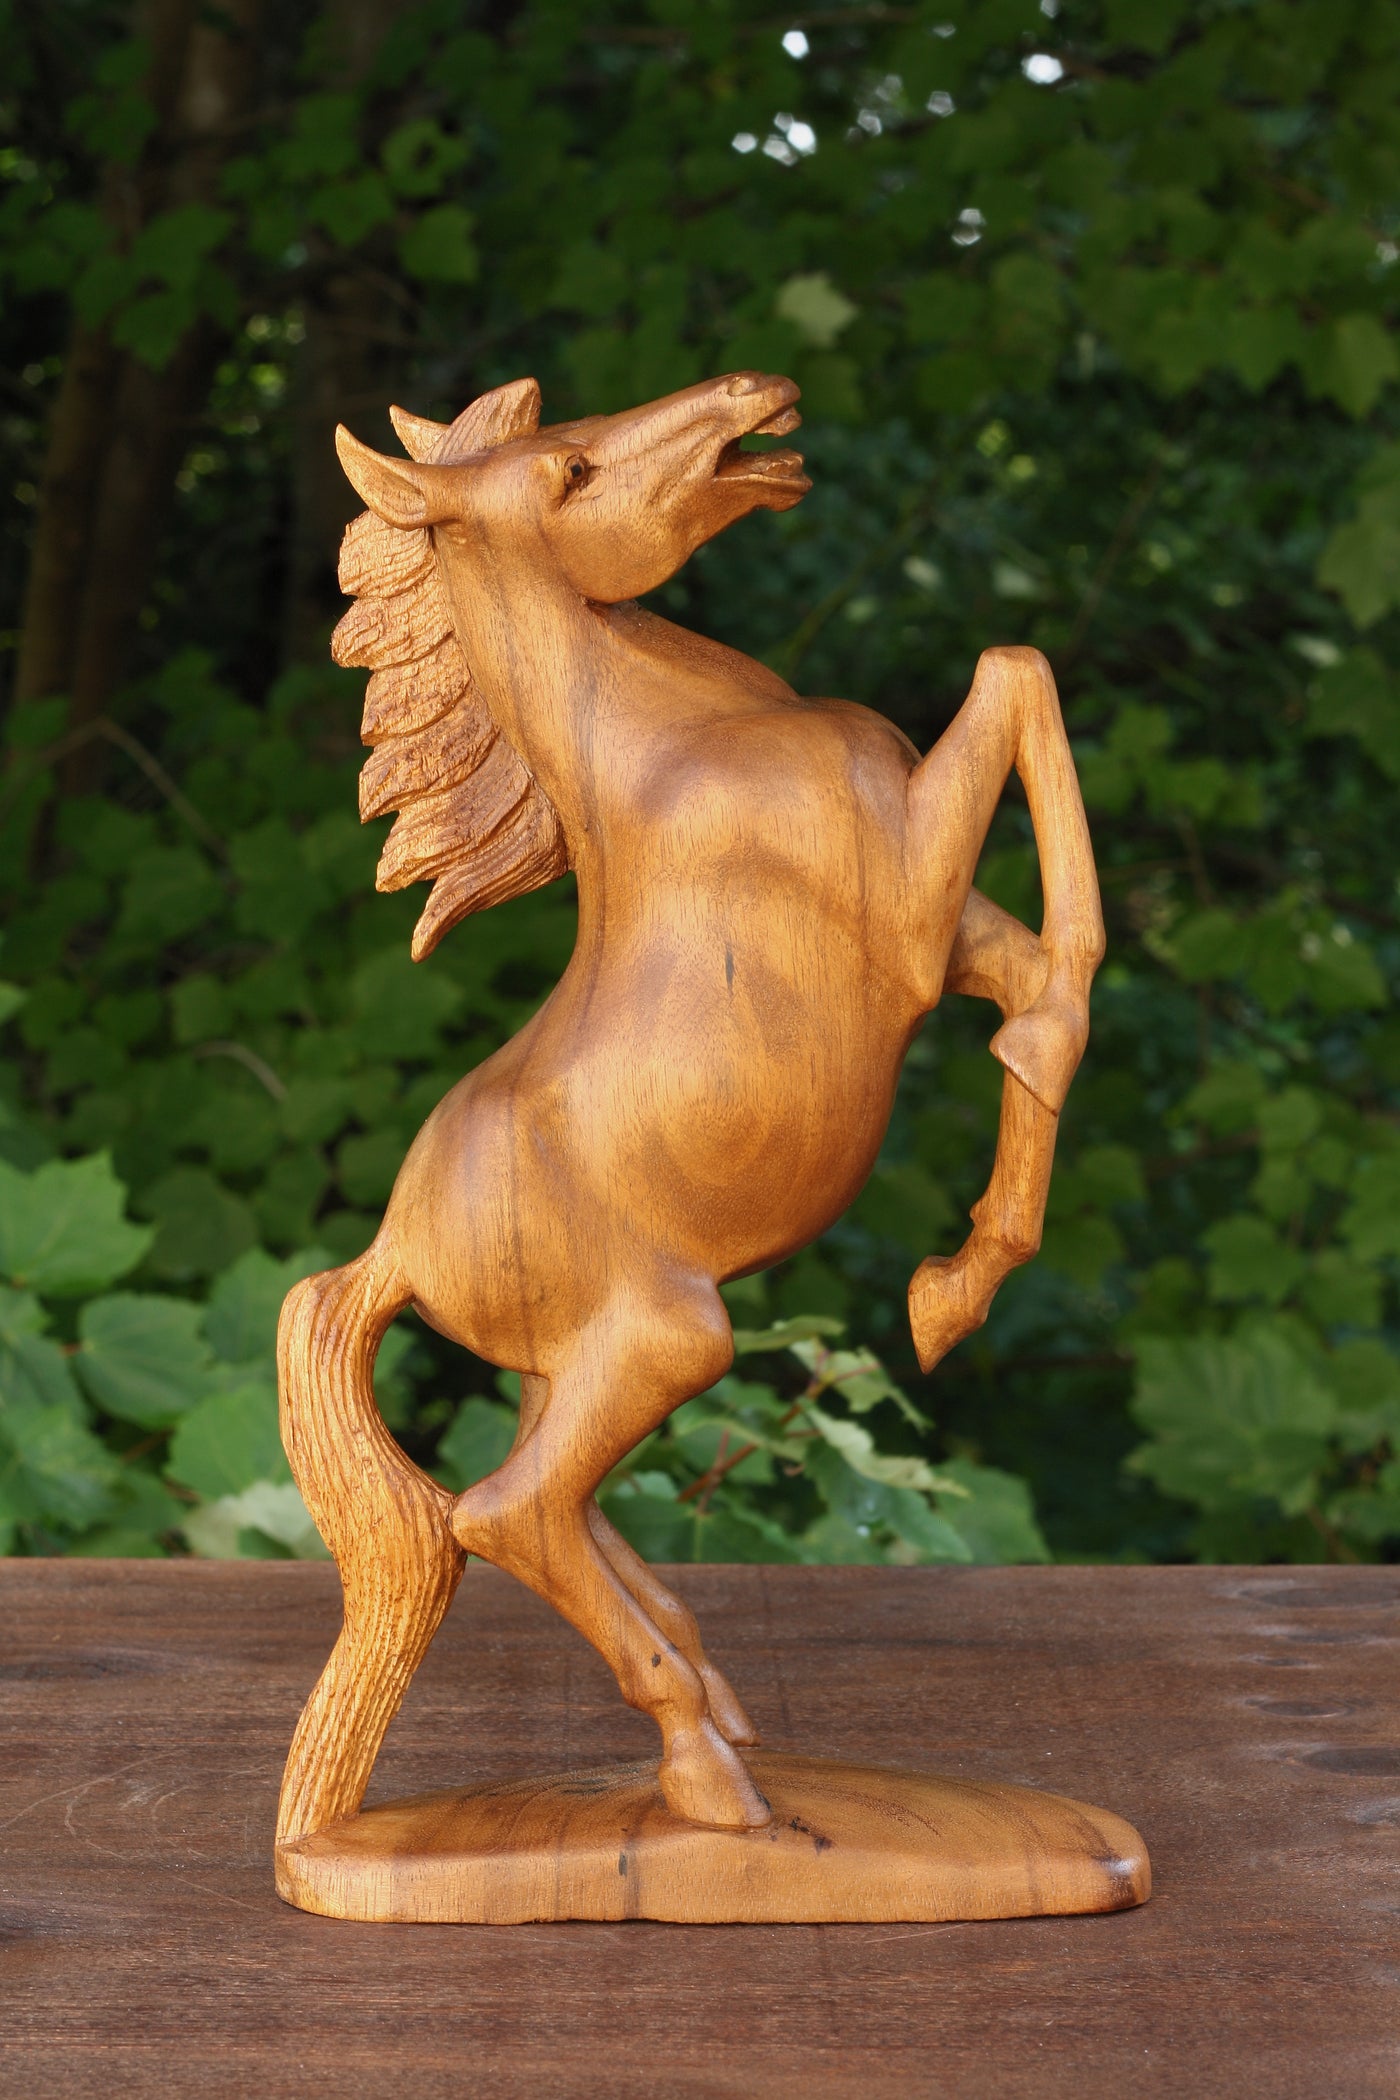 12" Wooden Hand Carved Rearing Horse Art Figurine Statue Sculpture Handcrafted Handmade Decorative Home Decor Accent Rustic Decoration